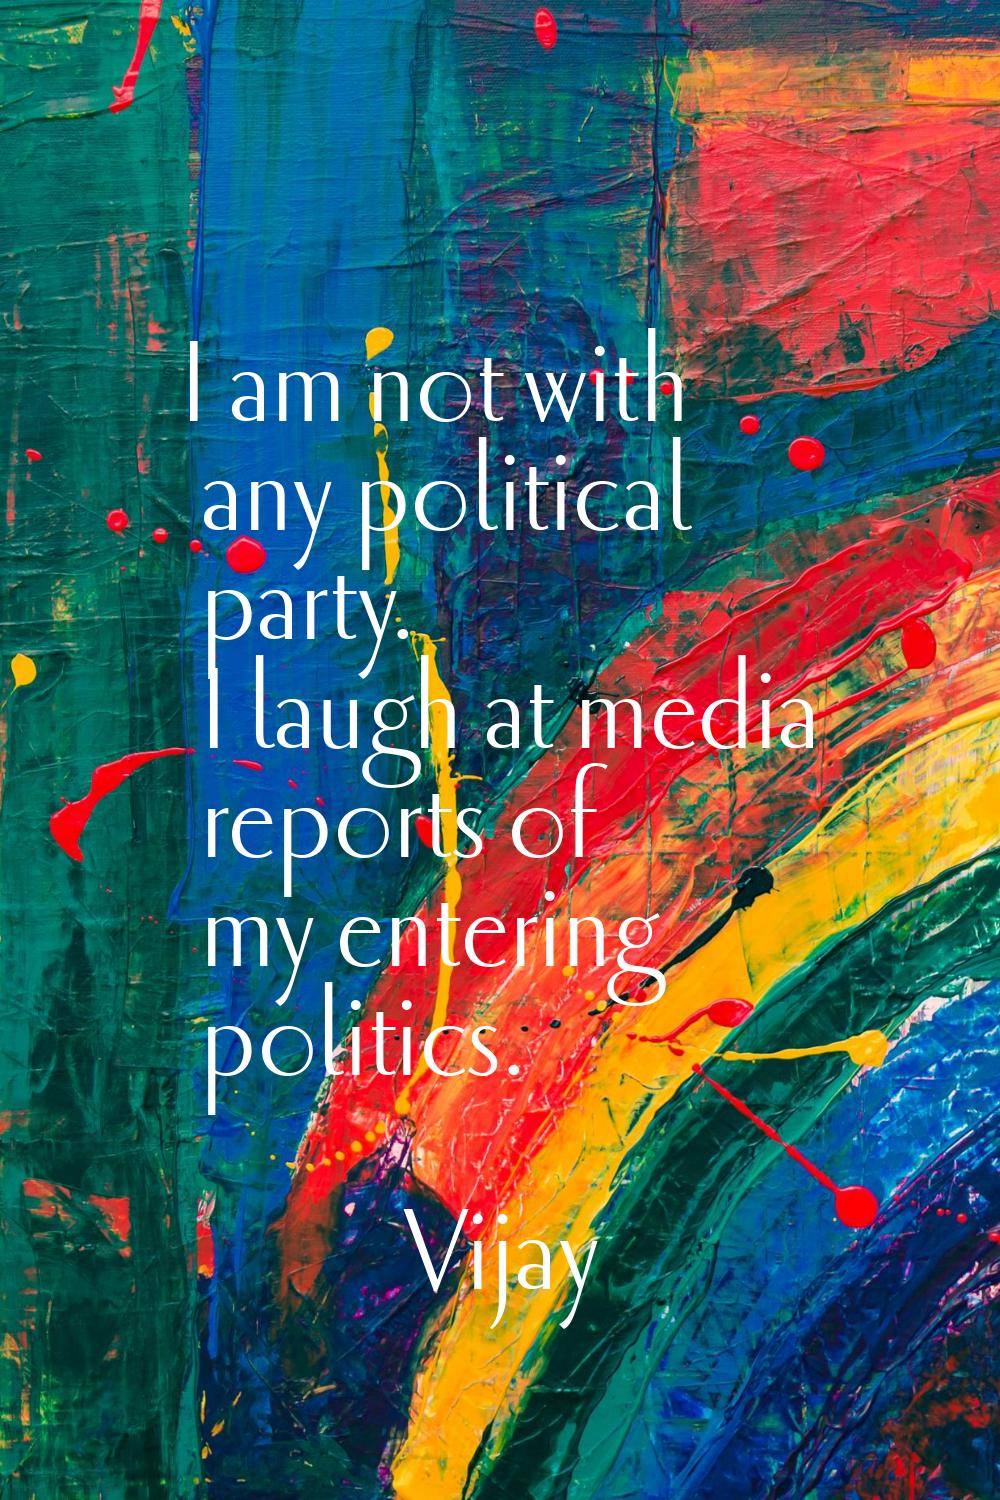 I am not with any political party. I laugh at media reports of my entering politics.